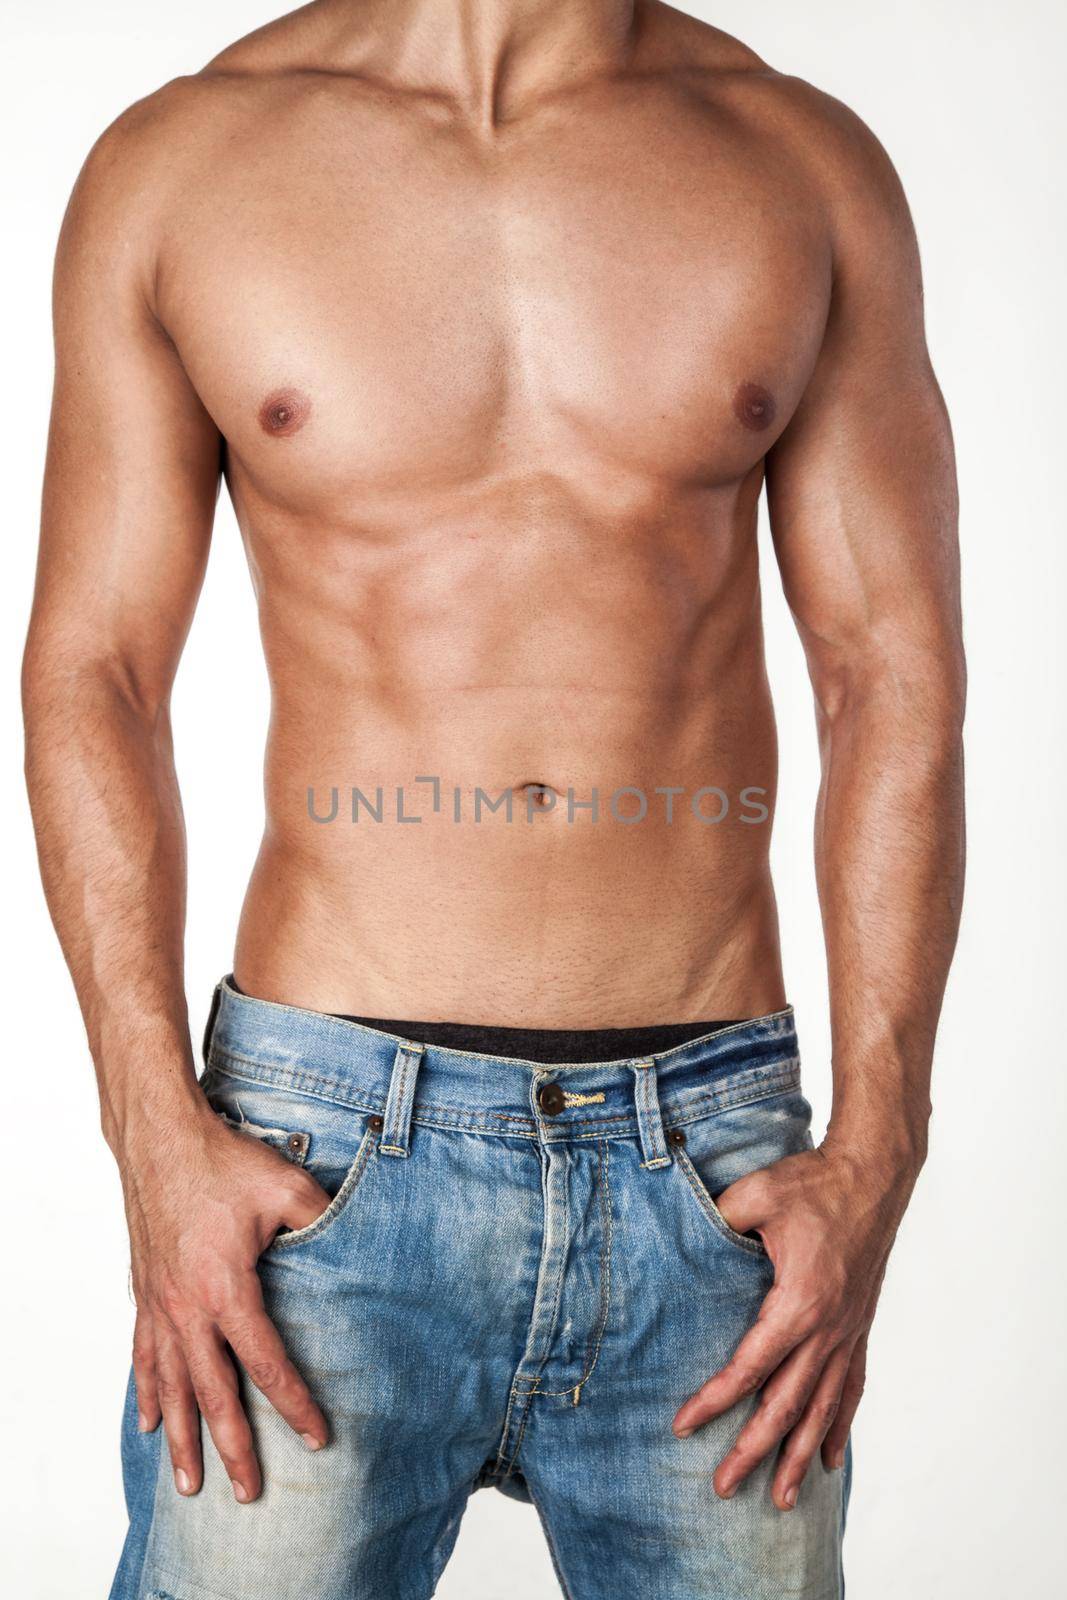 Man wearing jeans, standing posing shirtless, keeping hands on pockets, beautiful male sporty body. by Khosro1